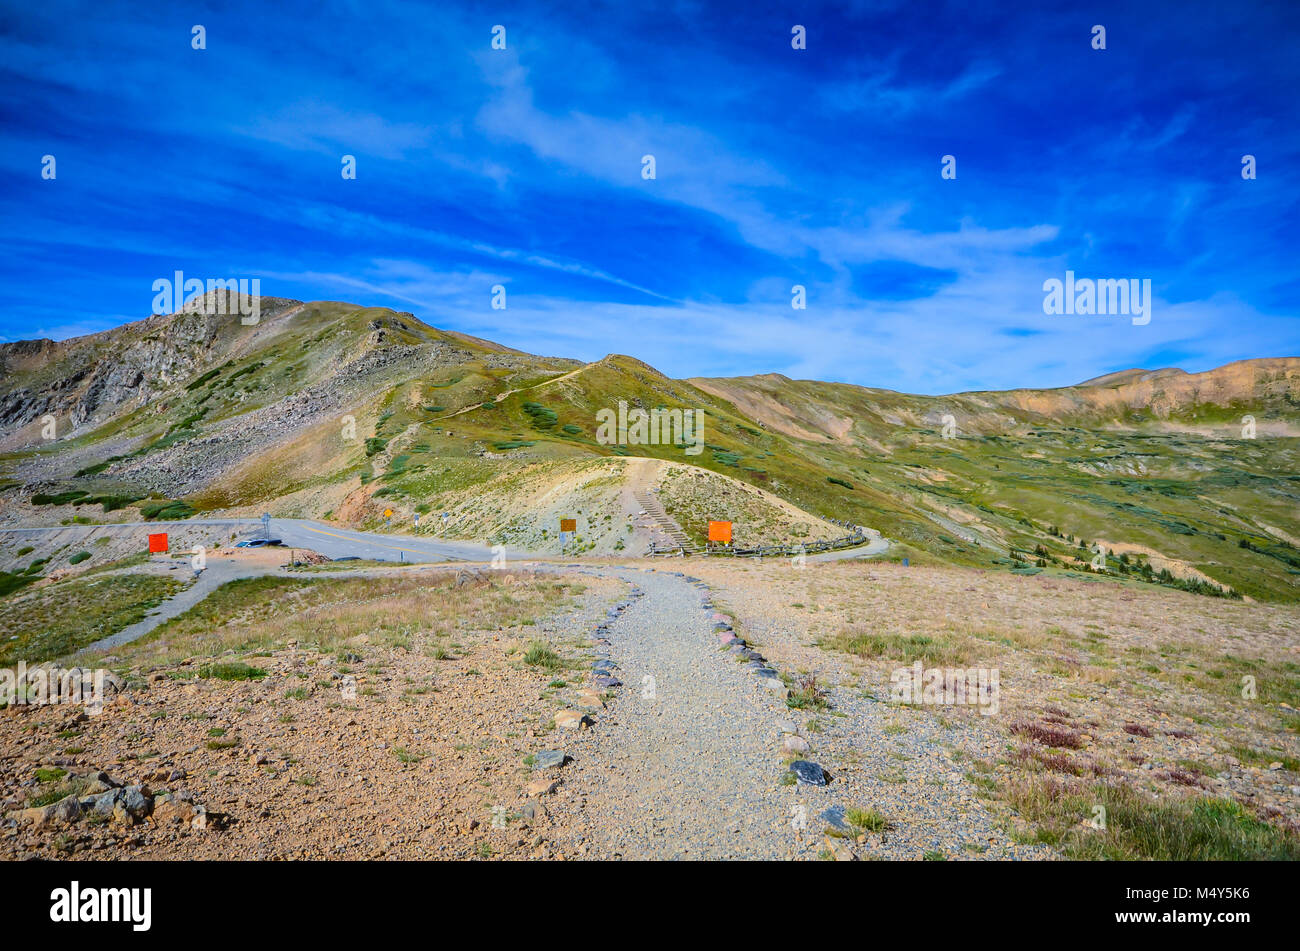 Hiking trail to peak at Loveland Pass in the Rocky Mountains of Colorado. Stock Photo